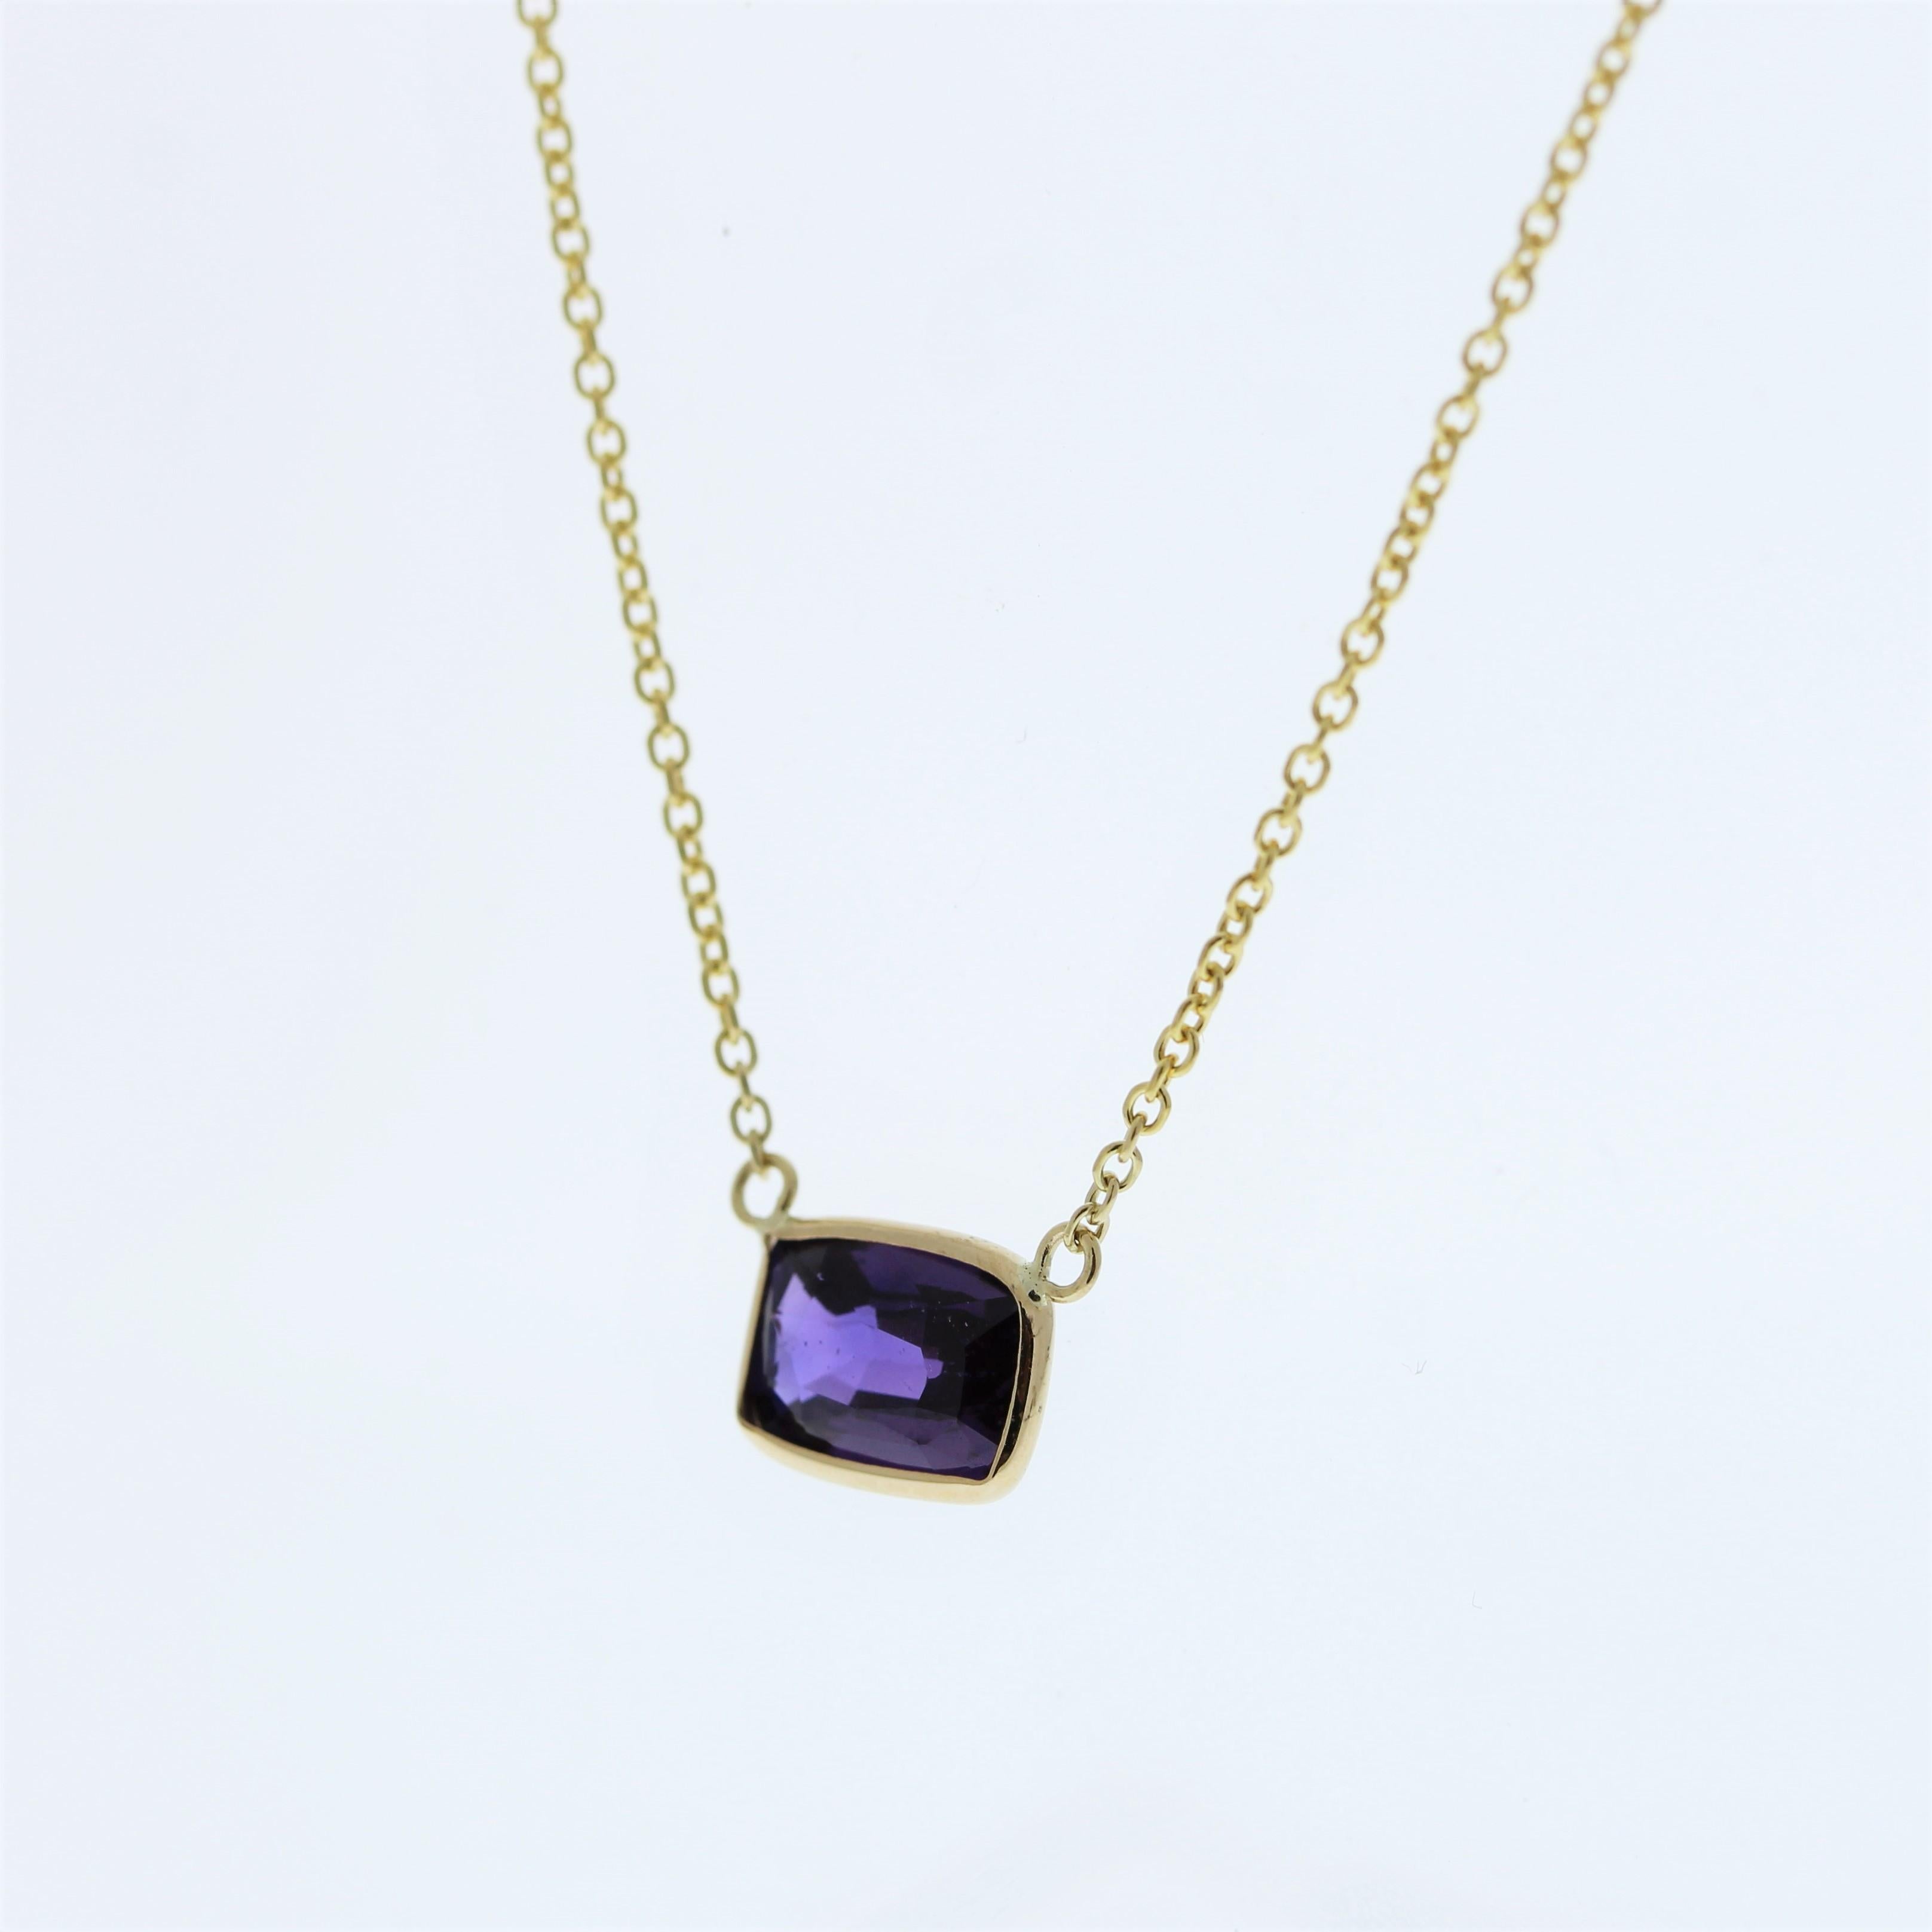 Taille coussin 1.97 Carat Cushion Sapphire Purple Fashion Necklaces In 14k Yellow Gold en vente